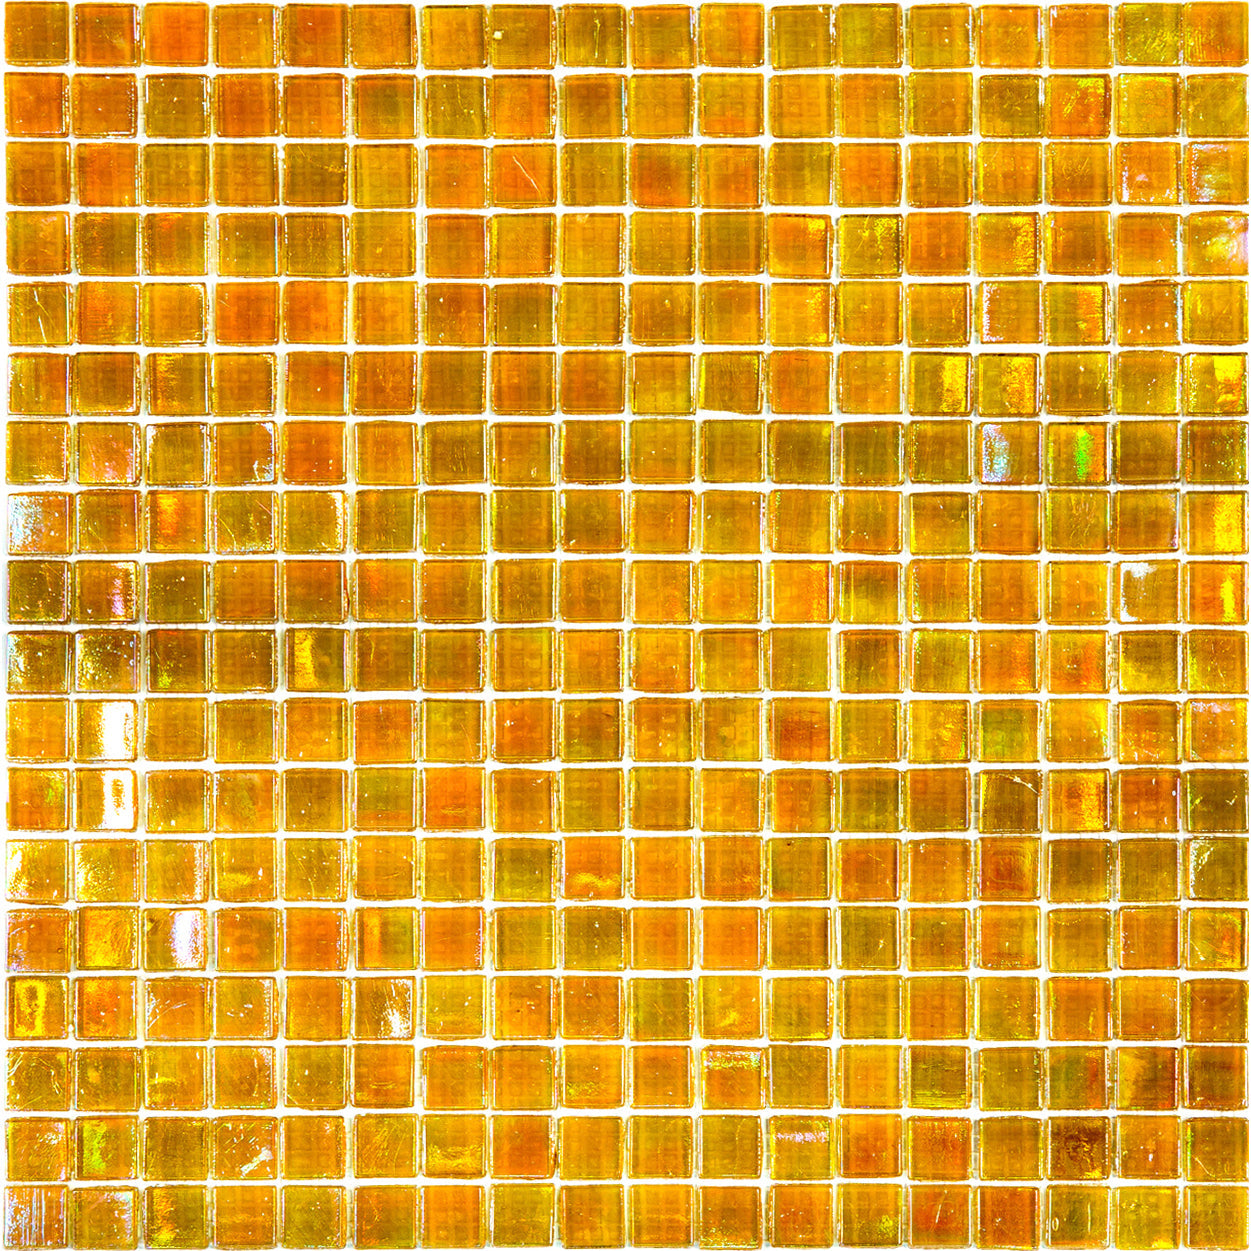 mir alma solid colors 0_6 inch nibble ne43 wall and floor mosaic distributed by surface group natural materials